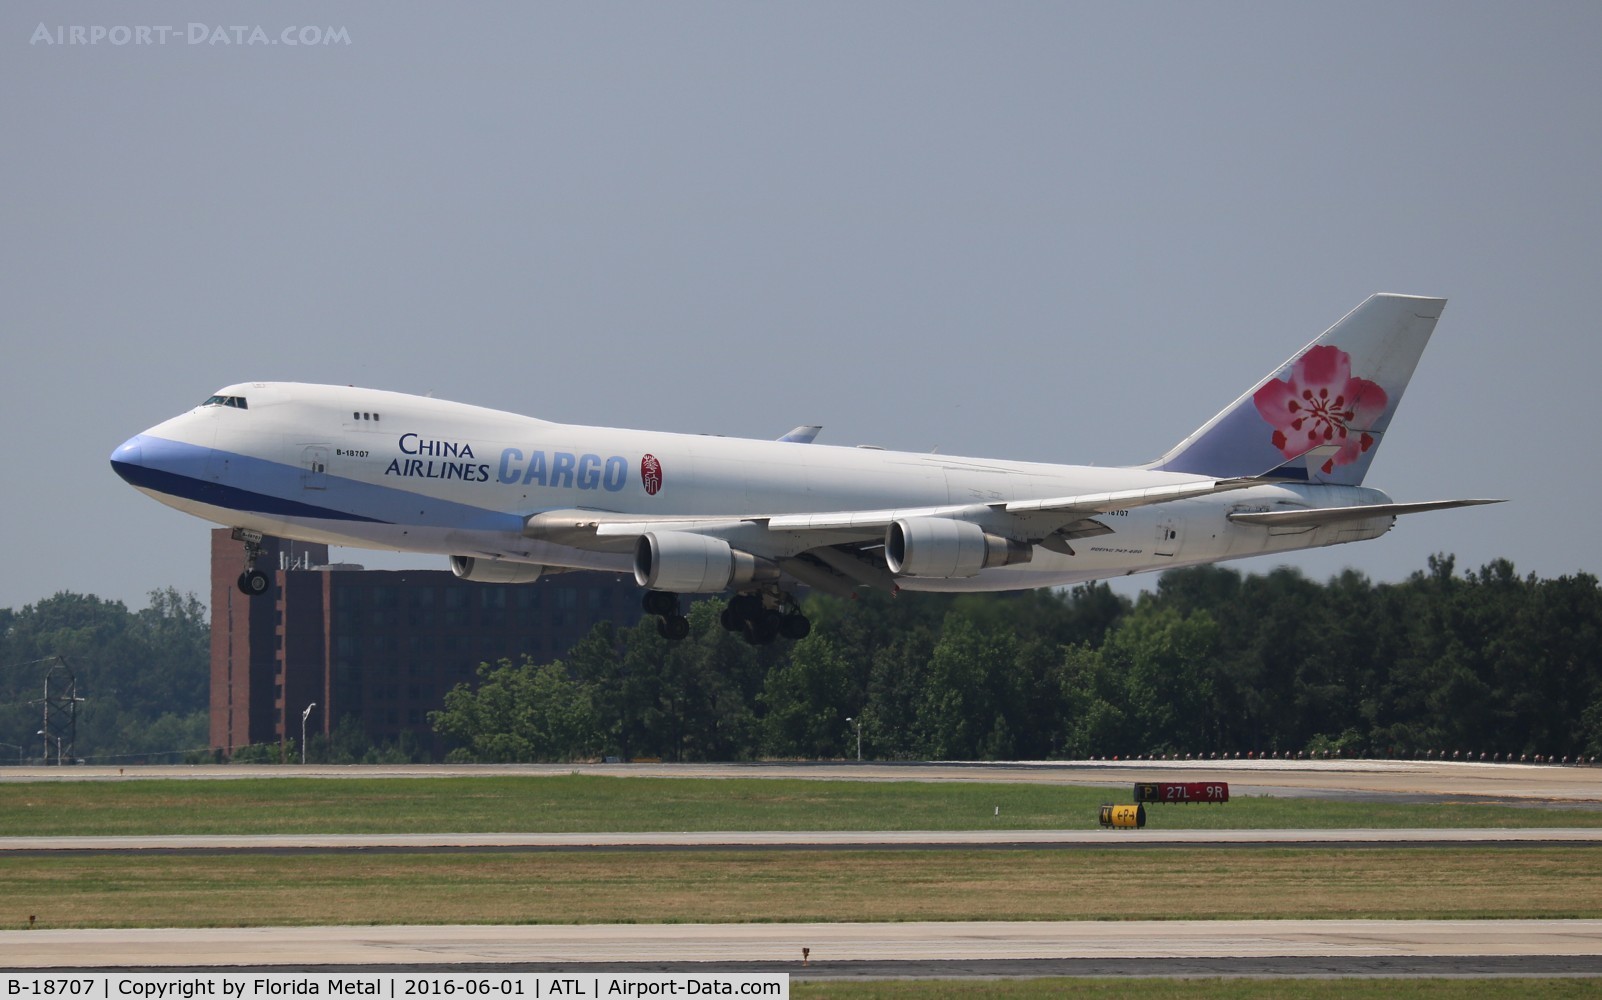 B-18707, 2001 Boeing 747-409F/SCD C/N 30764, China Airlines Cargo